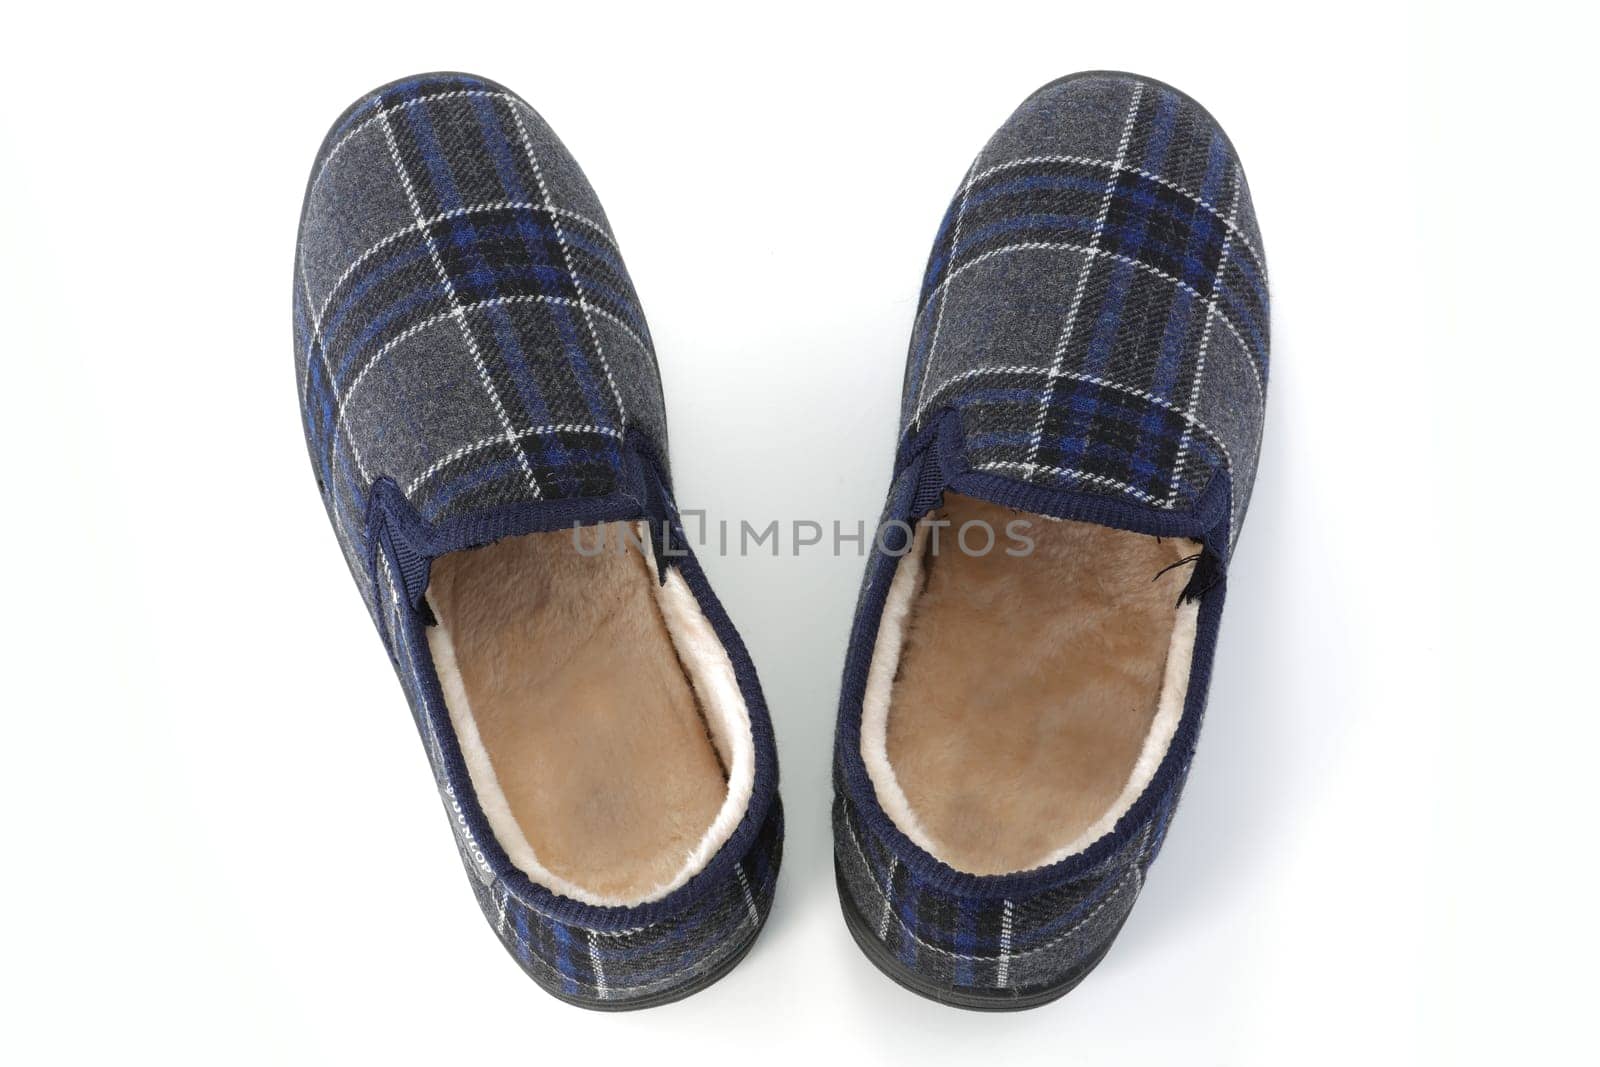 A top view of mens slippers on white background